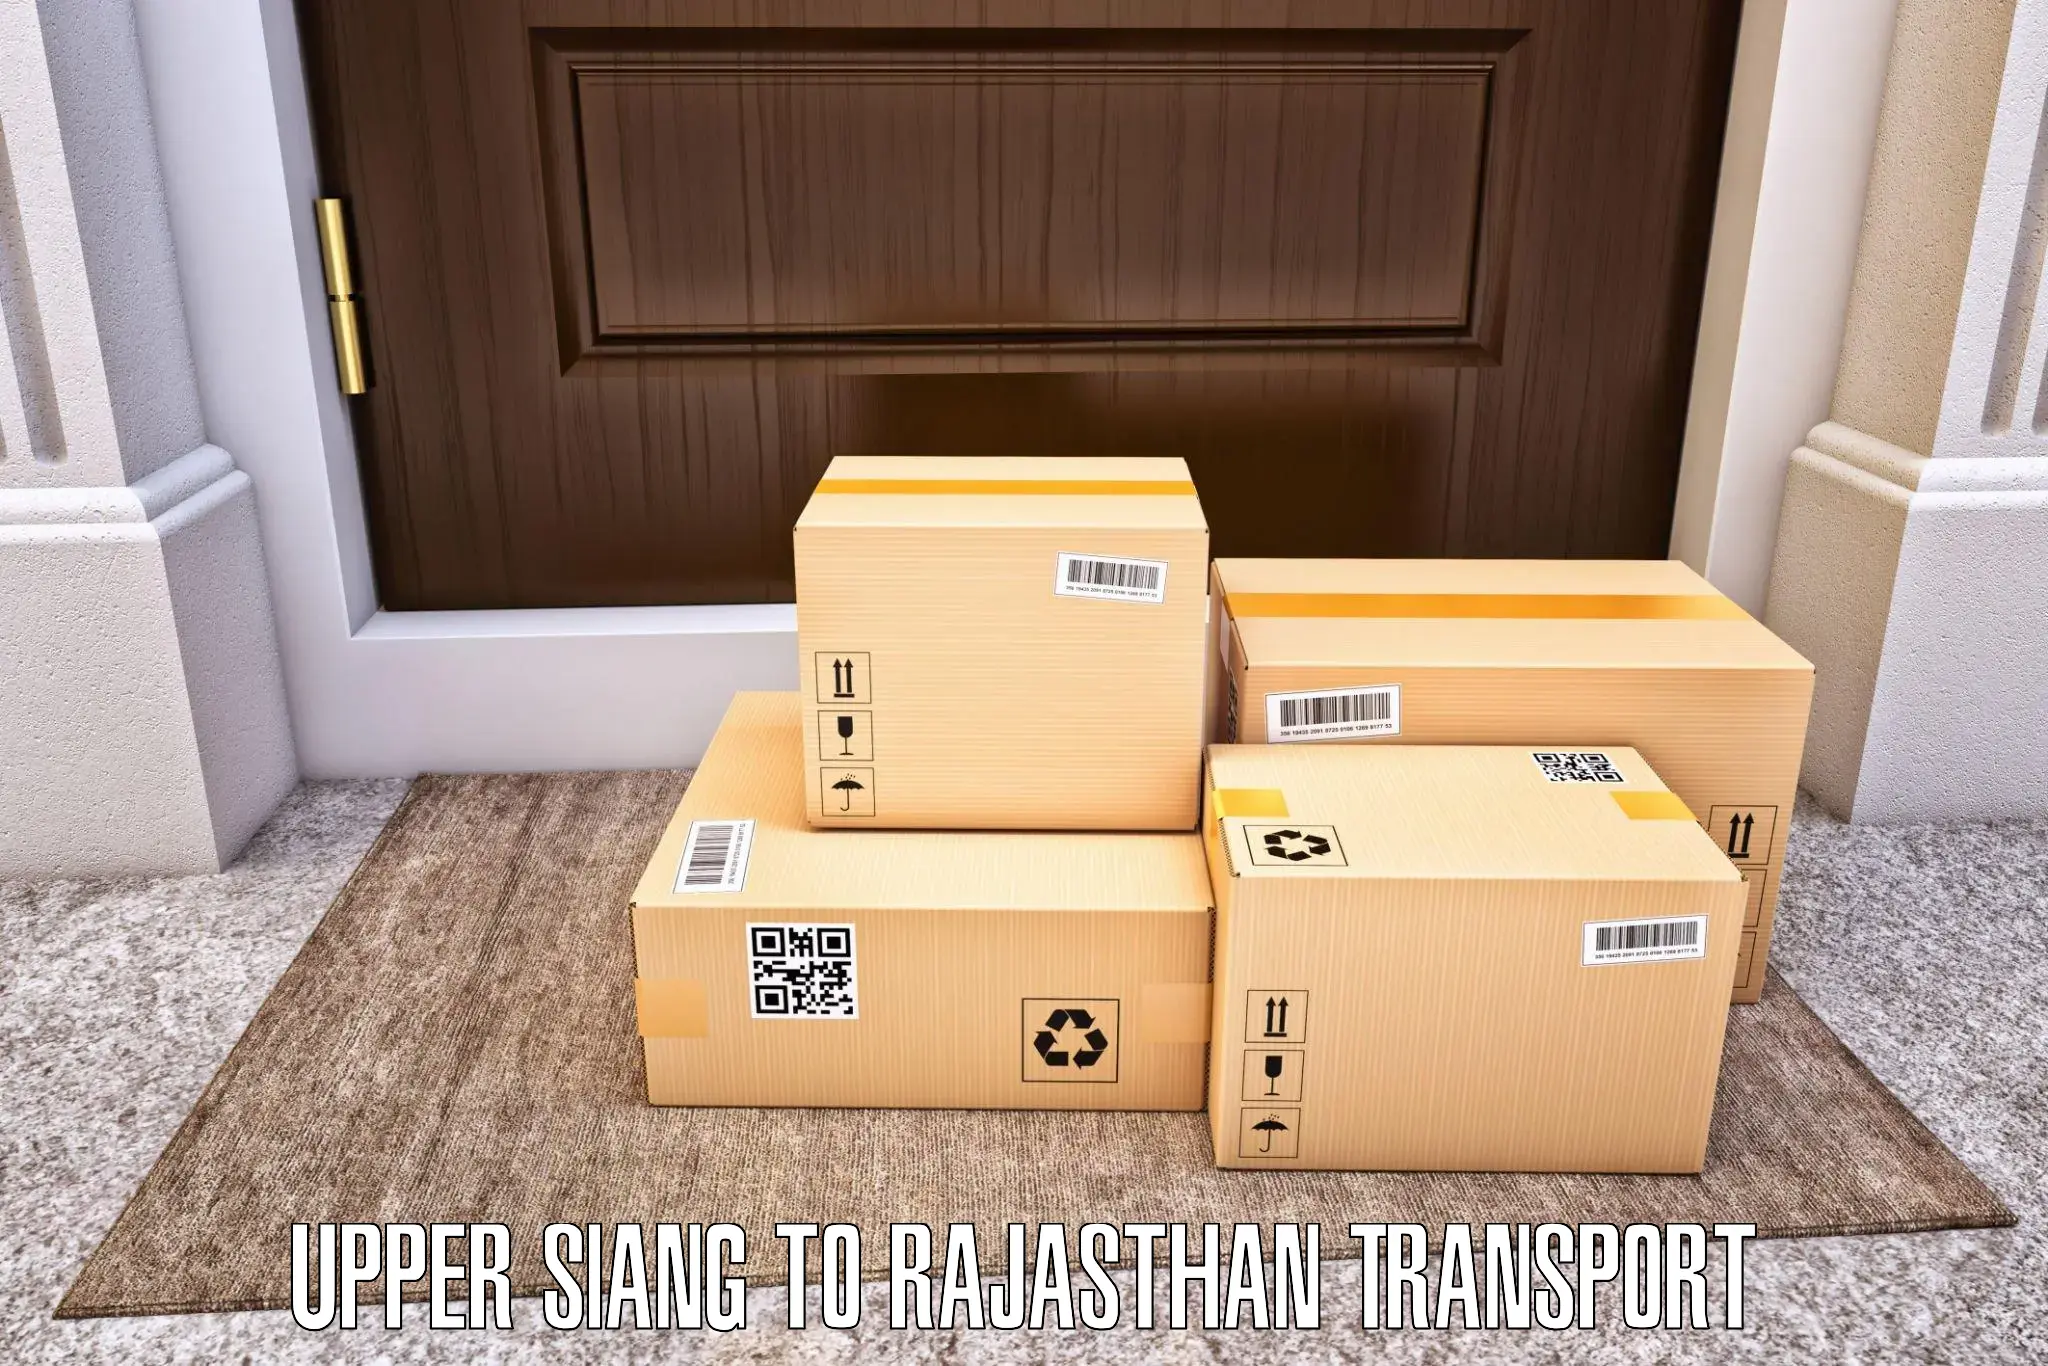 Shipping services Upper Siang to Jaisalmer